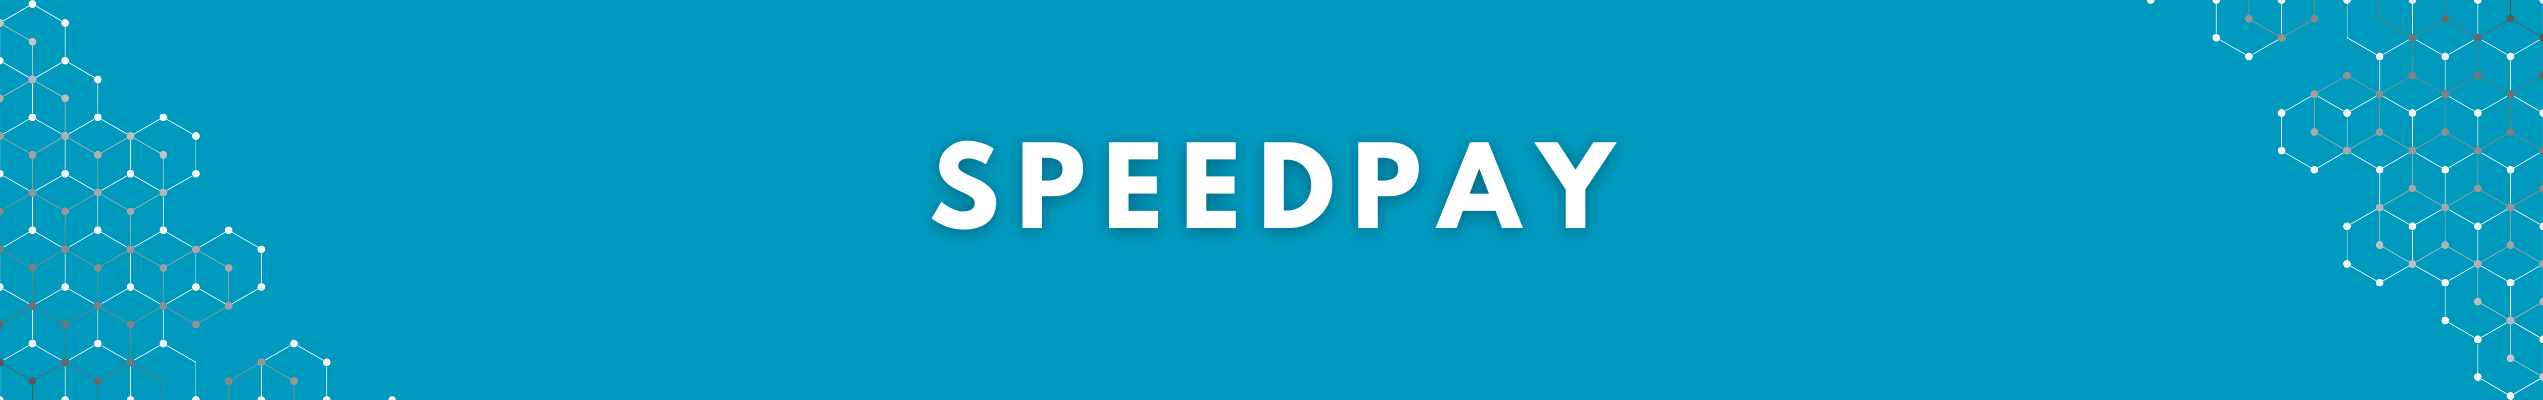 Pay your bill today with Speedpay